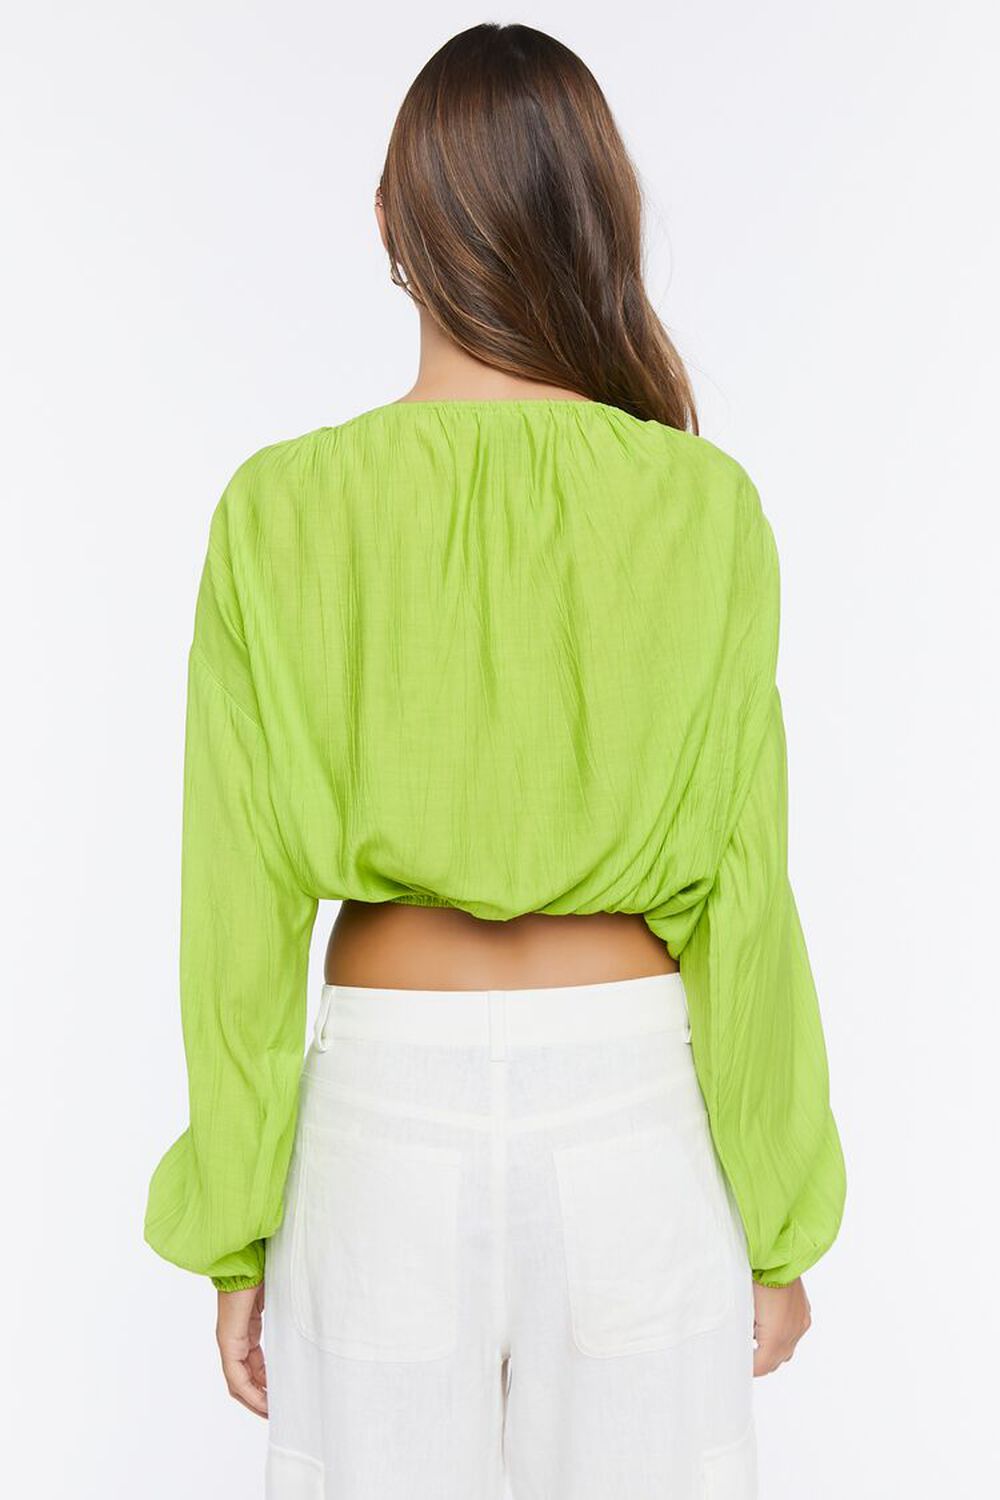 GREEN APPLE Peasant-Sleeve Ruched Crop Top, image 3